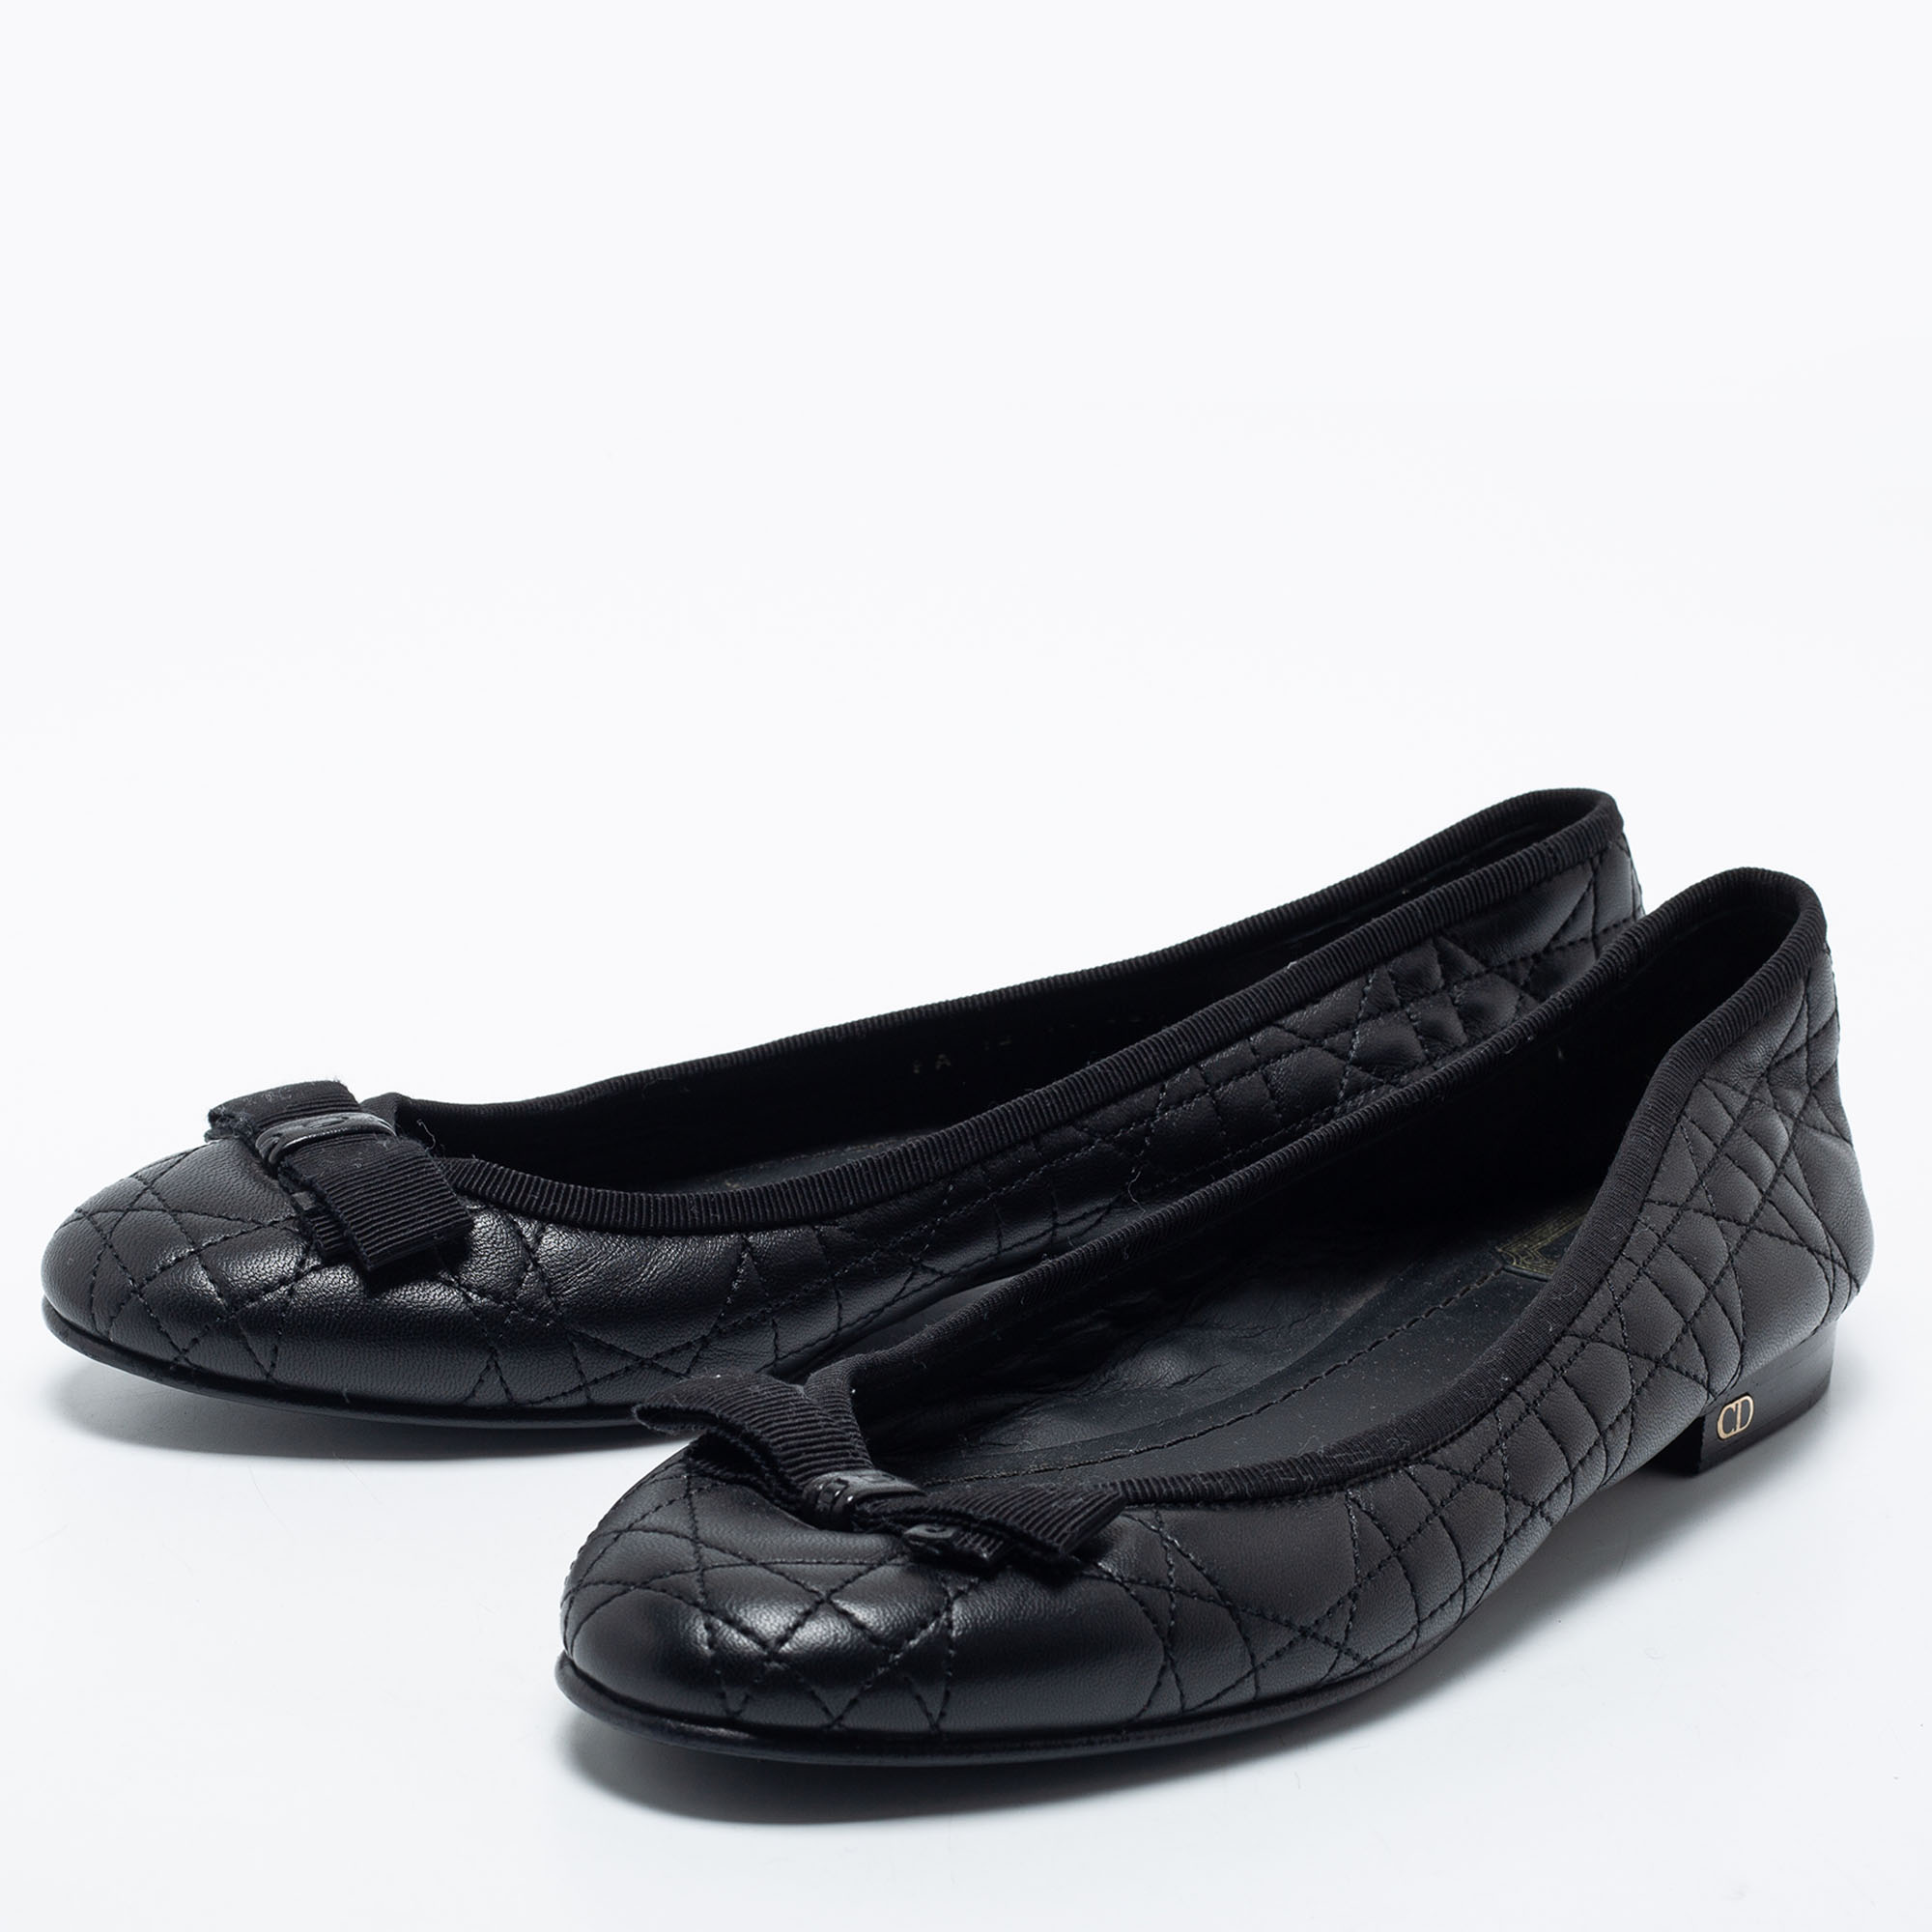 

Dior Black Cannage Quilted Leather Bow Ballet Flats Size